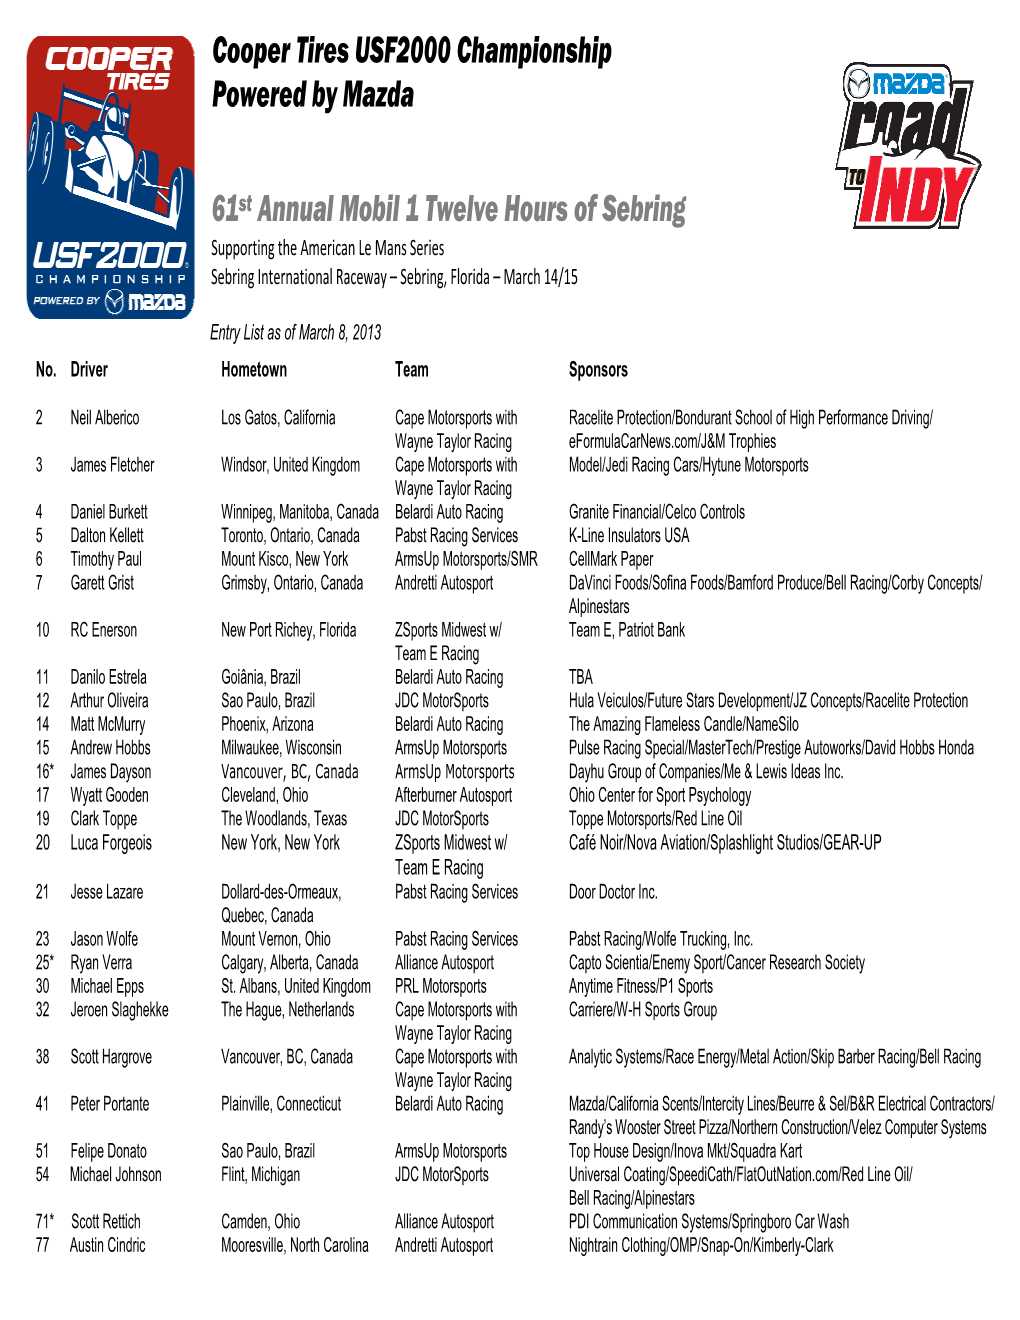 Entry List As of March 8, 2013